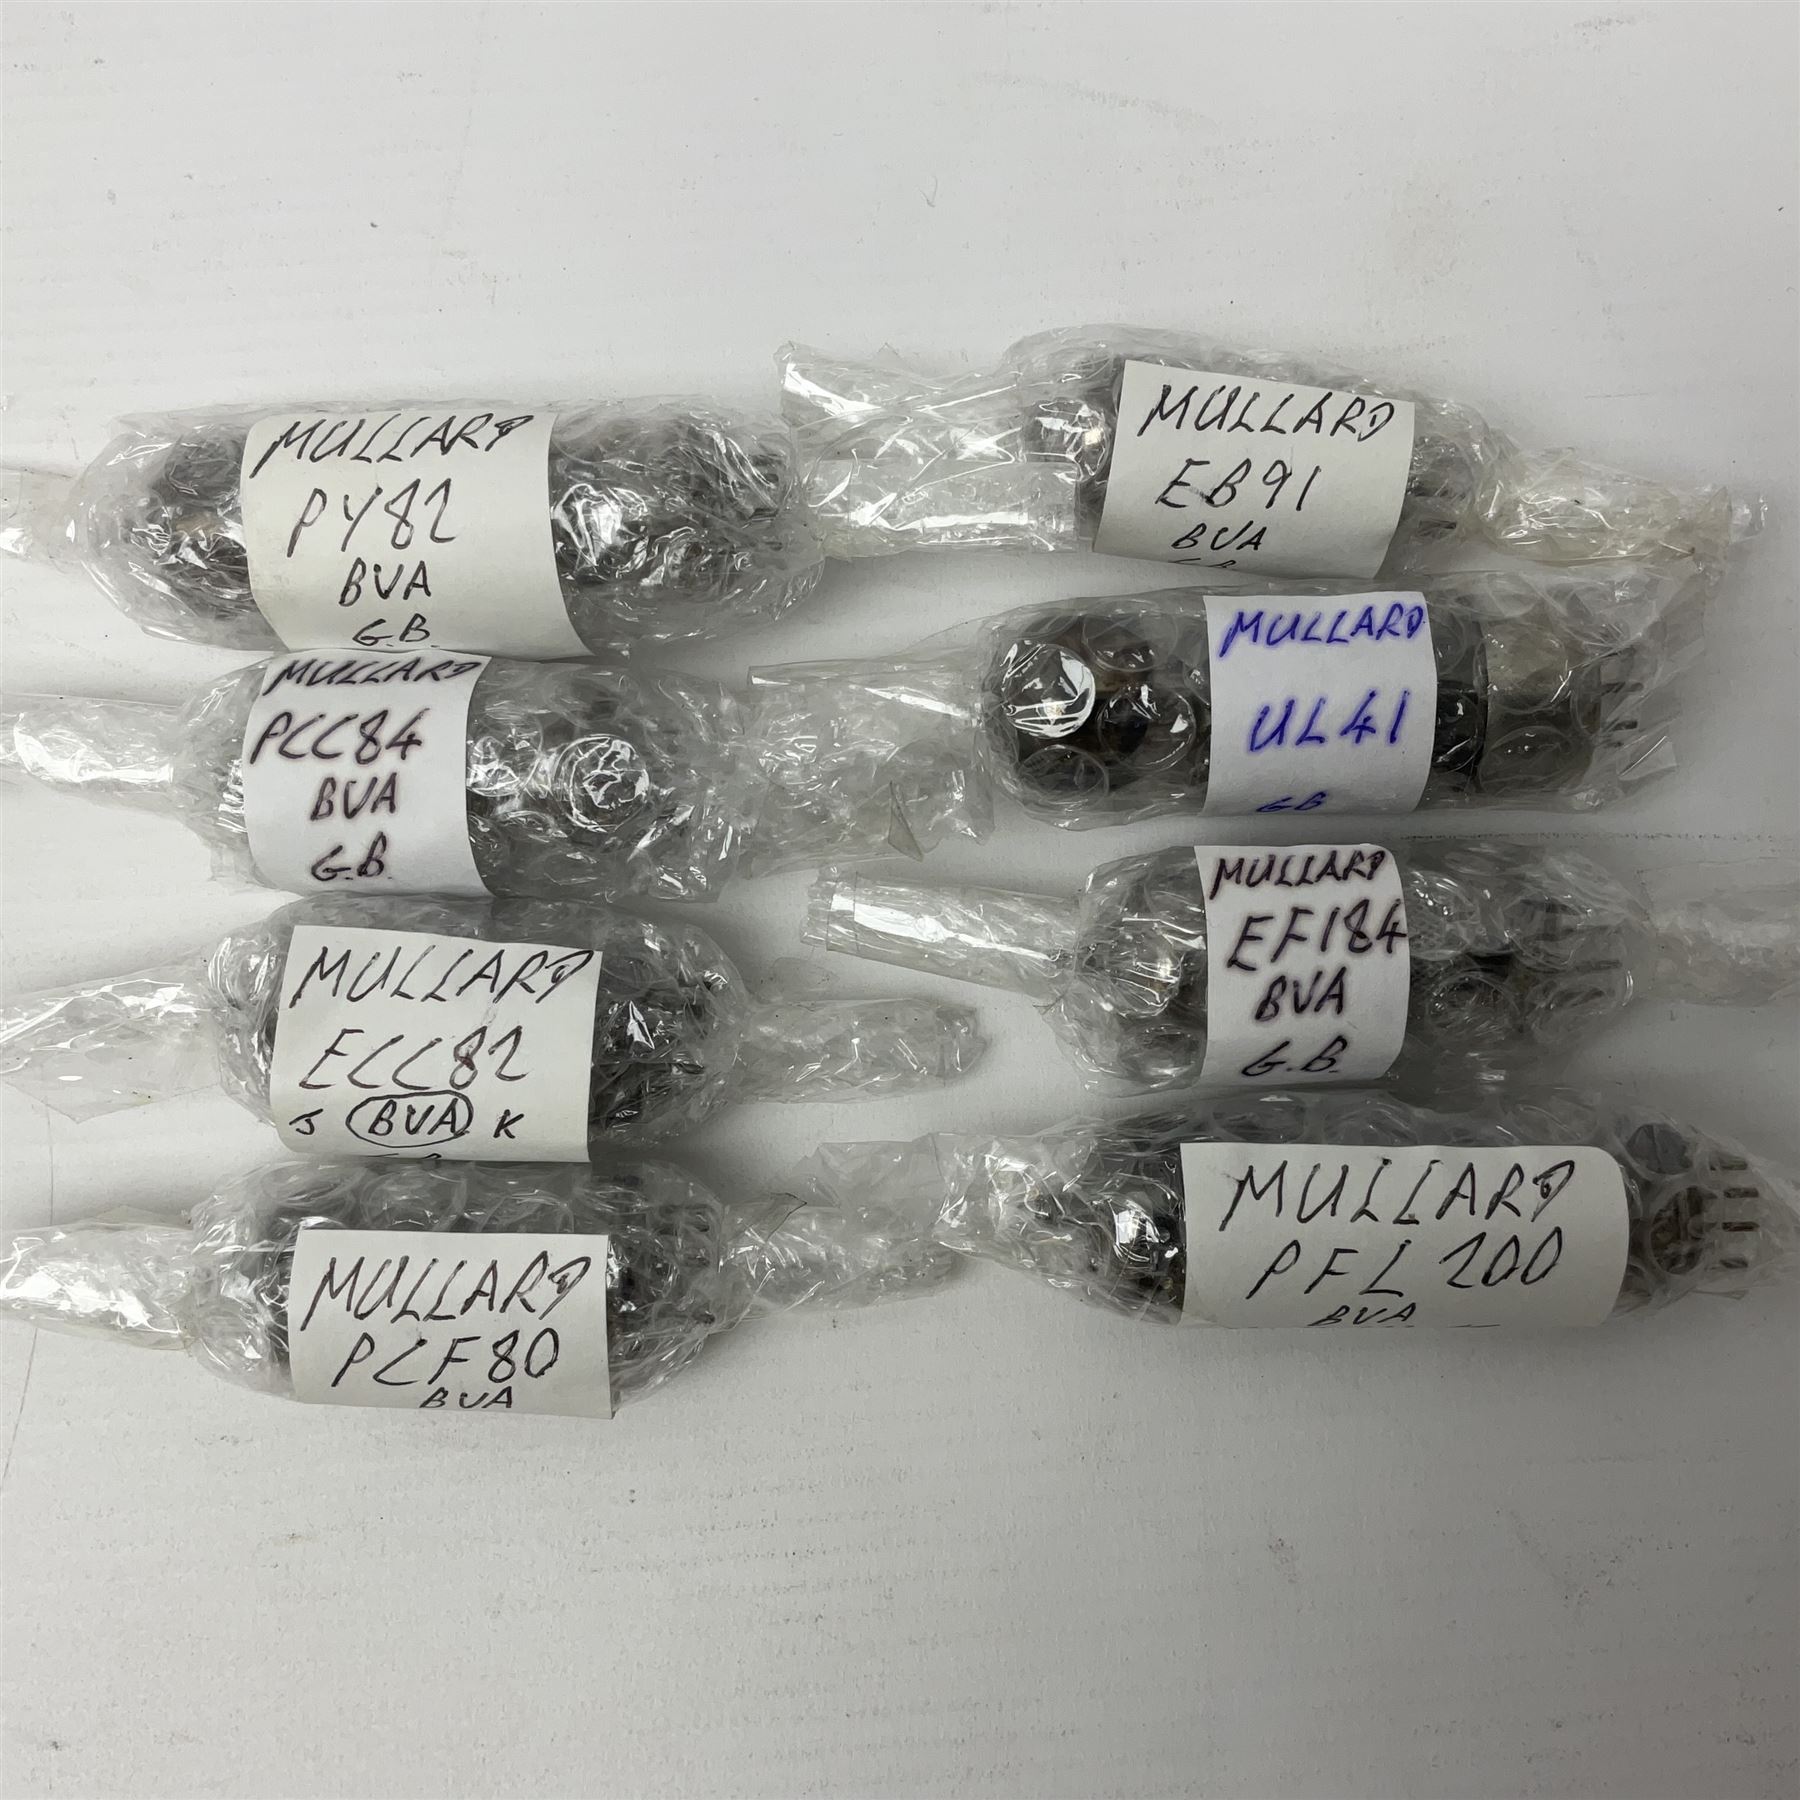 Collection of Mullard thermionic radio valves/vacuum tubes - Image 7 of 15